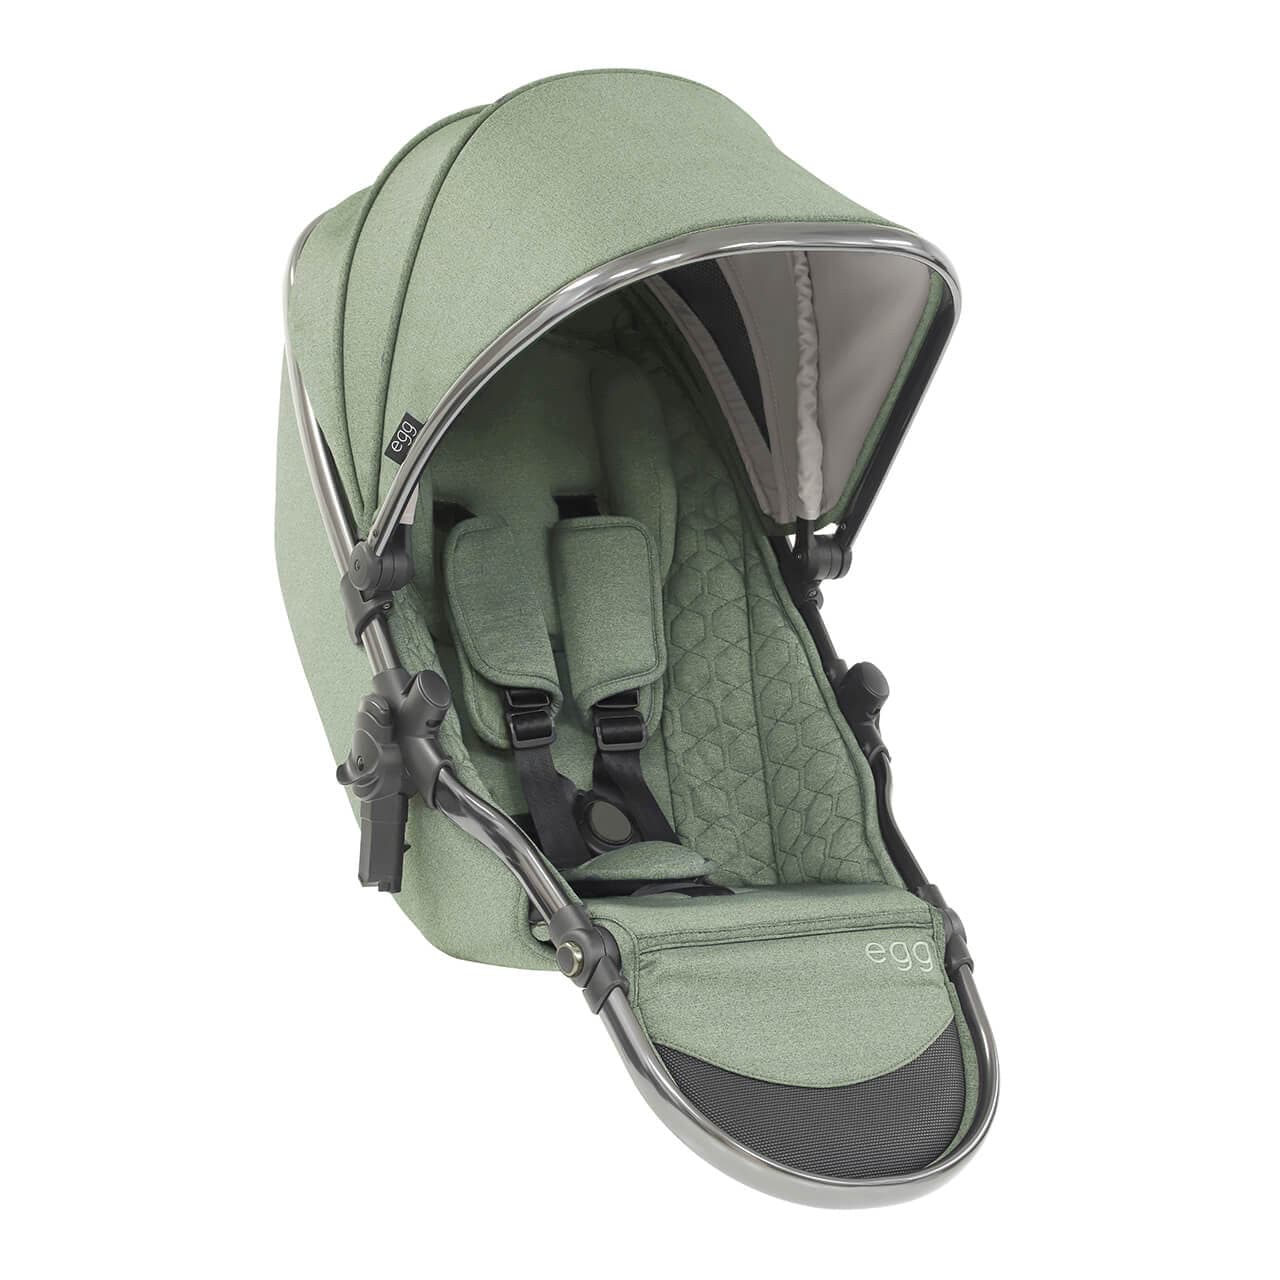 Egg® 2 Tandem Stroller - Seagrass -  | For Your Little One